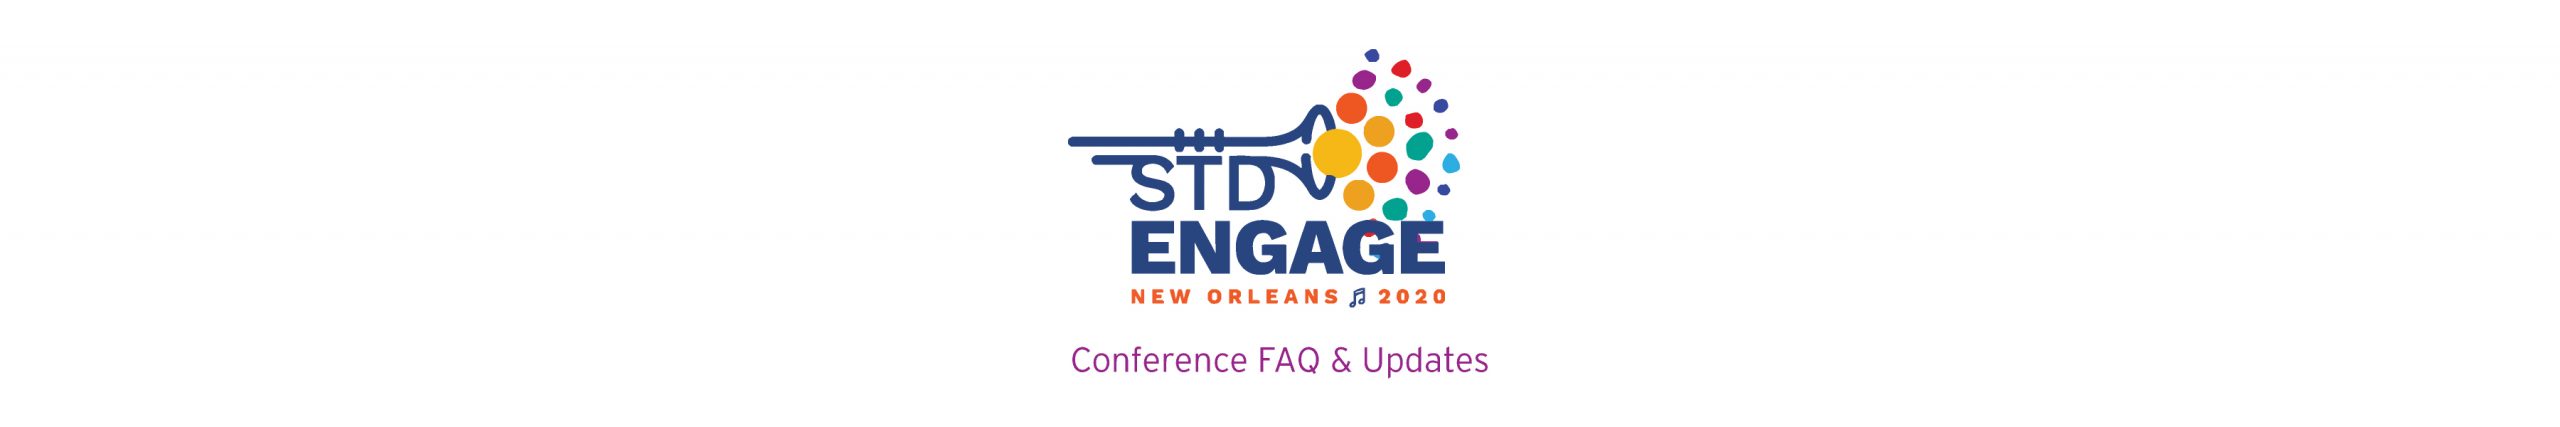 STD Engage Unites Health Professionals for Annual Conference This December